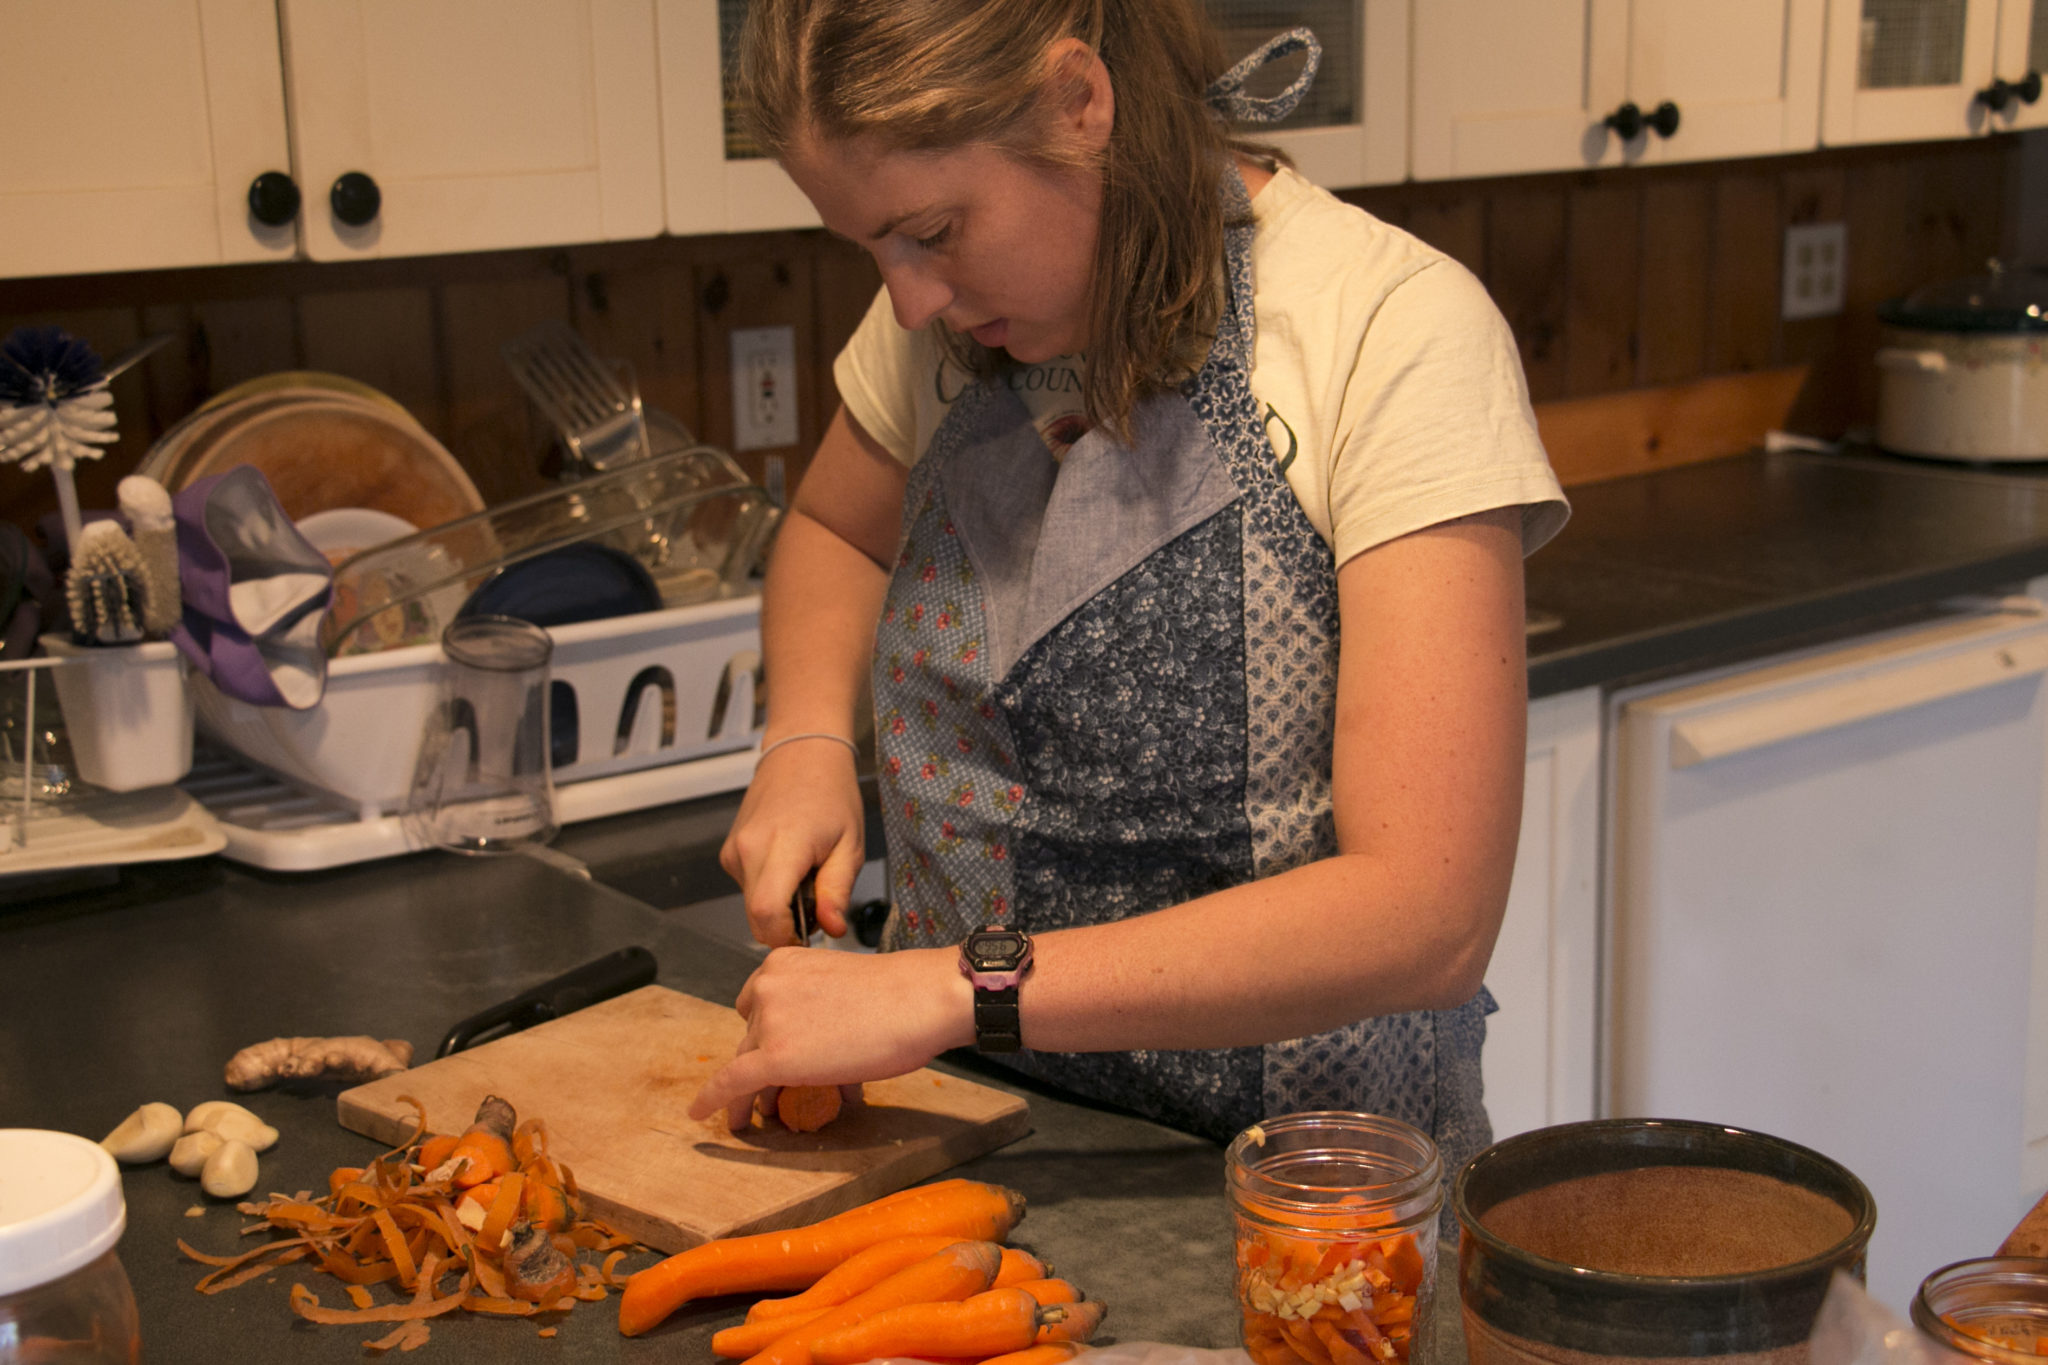 Mary Margaret Ripley chops carrots in preparation to make fermented vegetables in jars with ginger, curry powder and brine at her home, Ripley Farm, in Dover-Foxcroft, Maine. | Aislinn Sarnacki